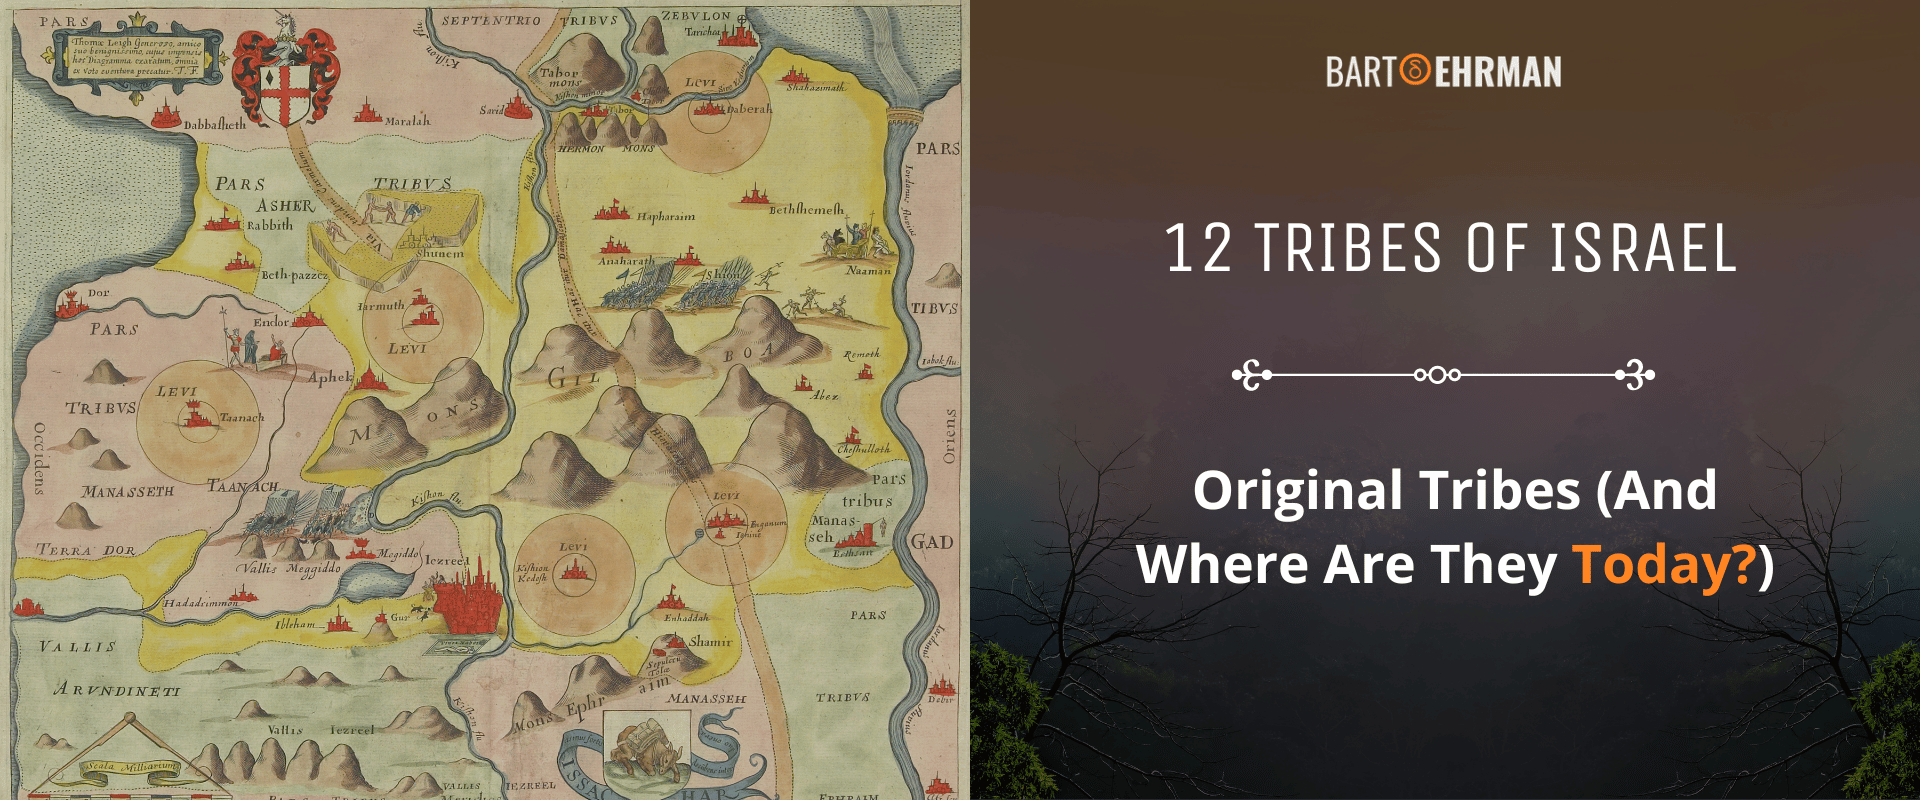 12 Tribes of Israel_ Original Tribes And Where Are They Today